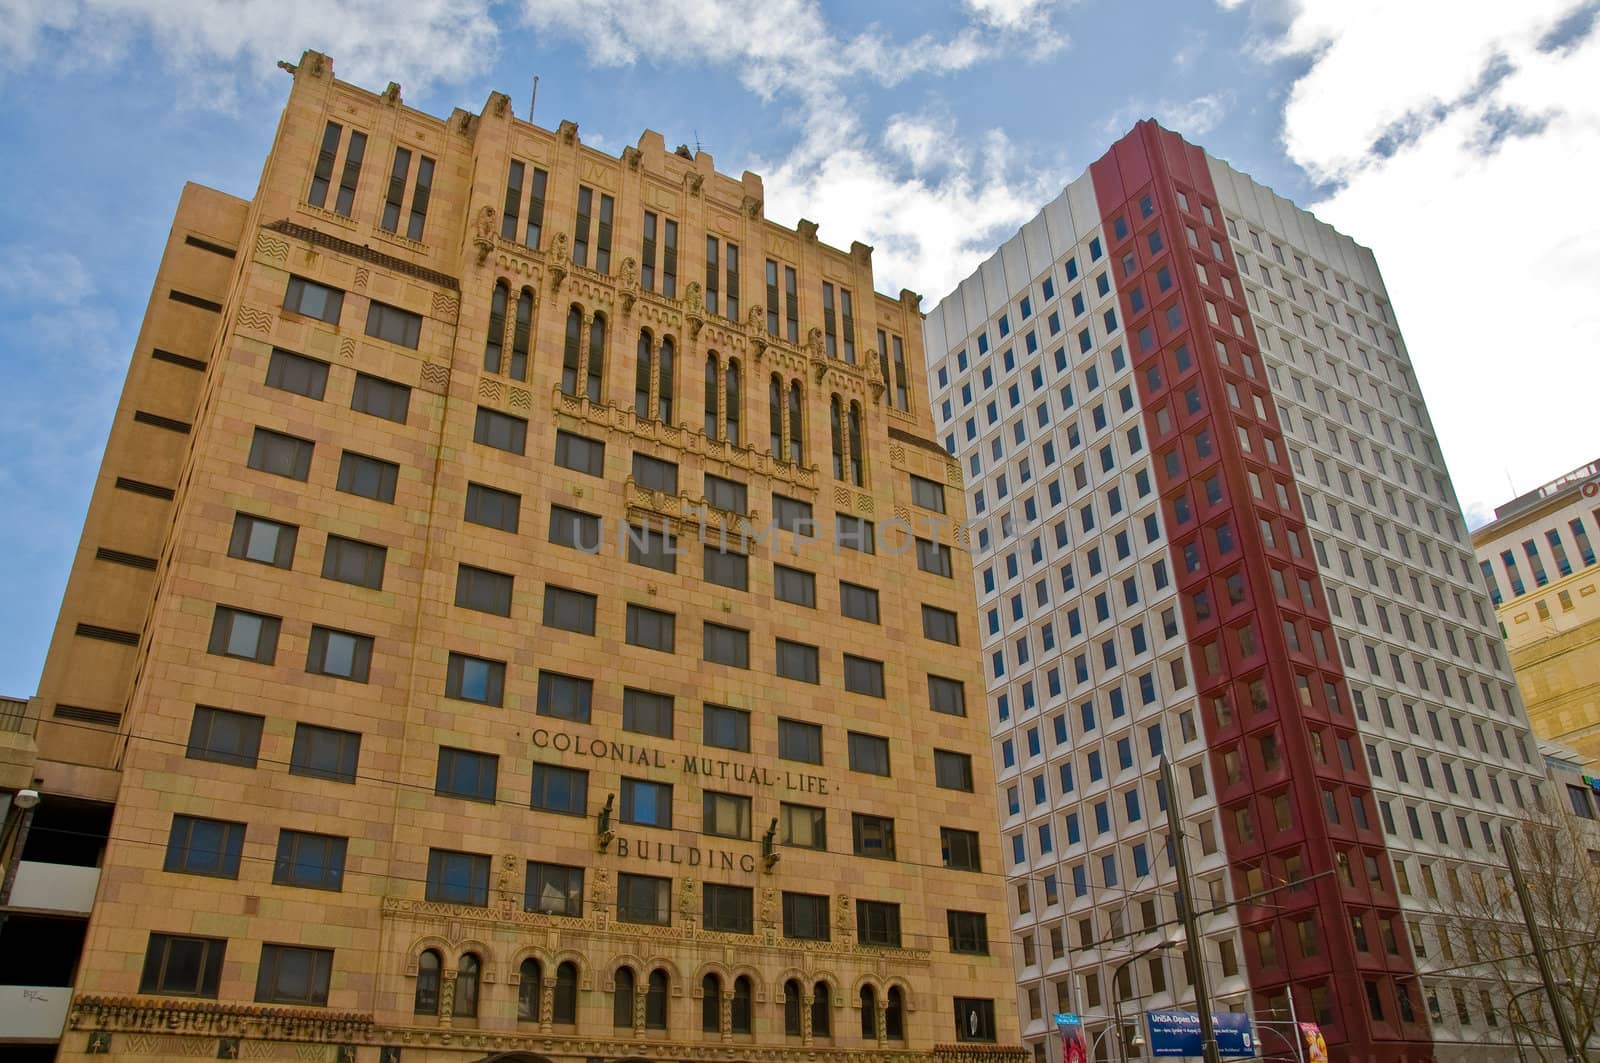 adelaide building in southern australia